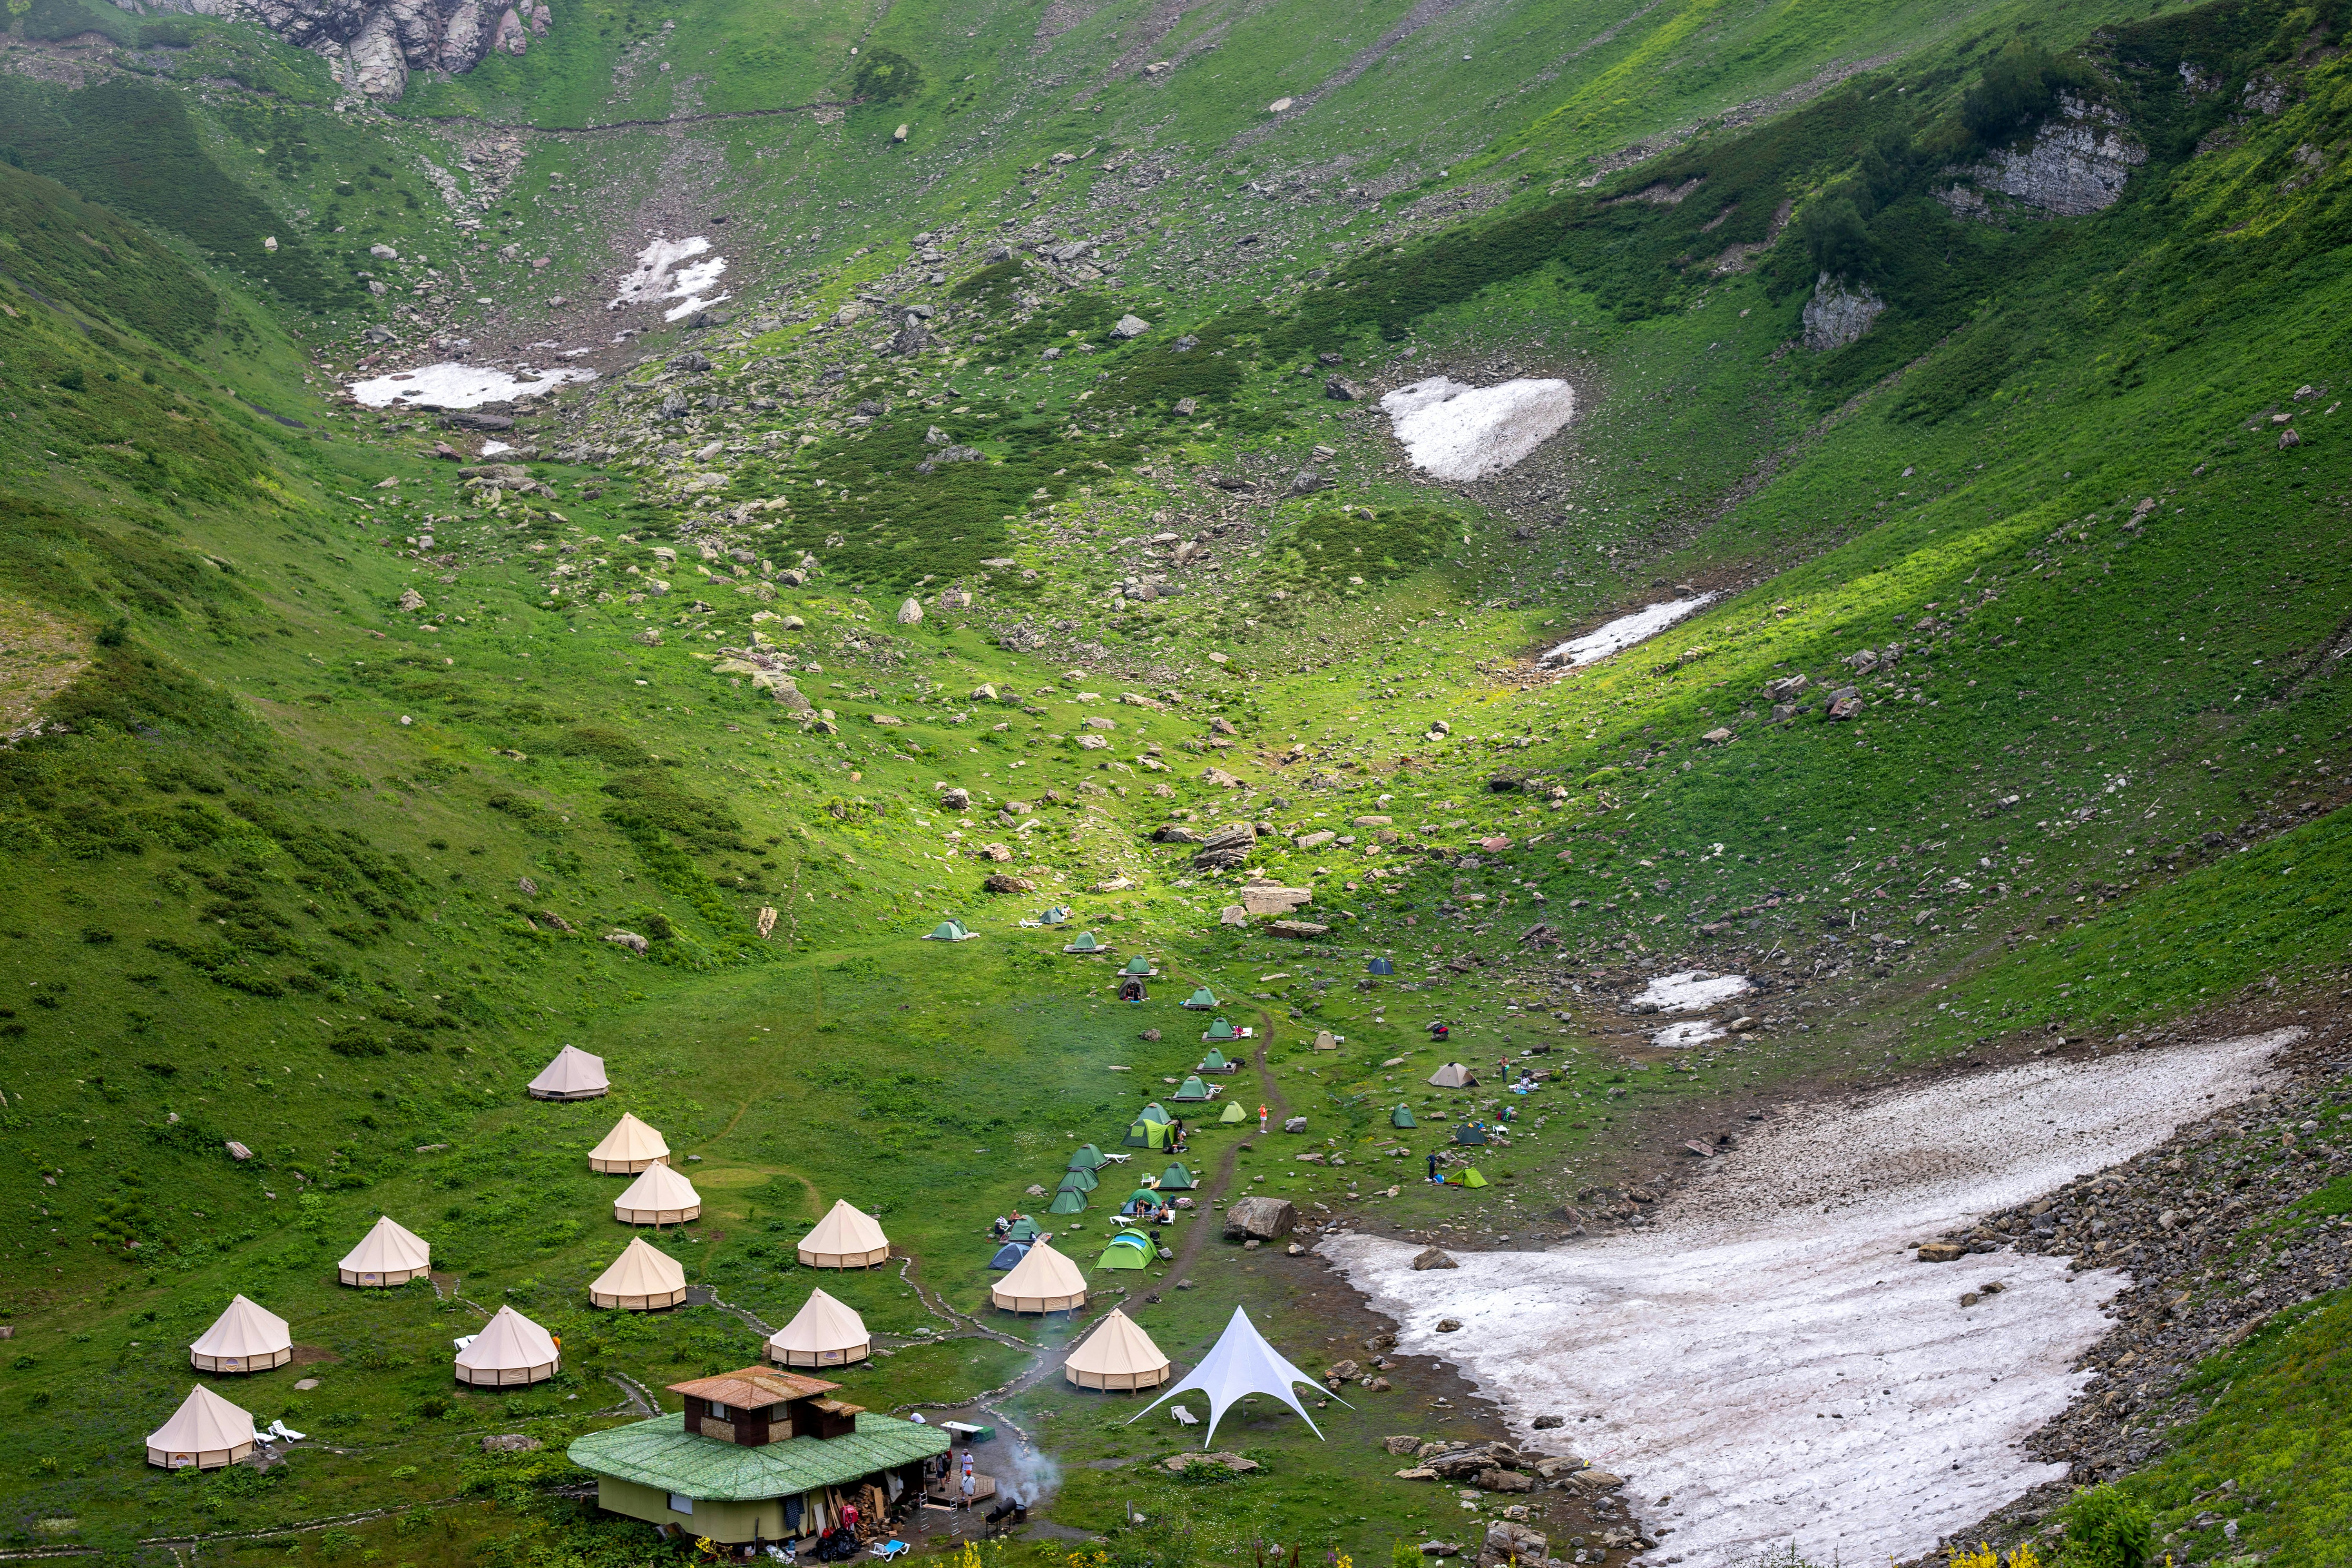 Tents in the mountains